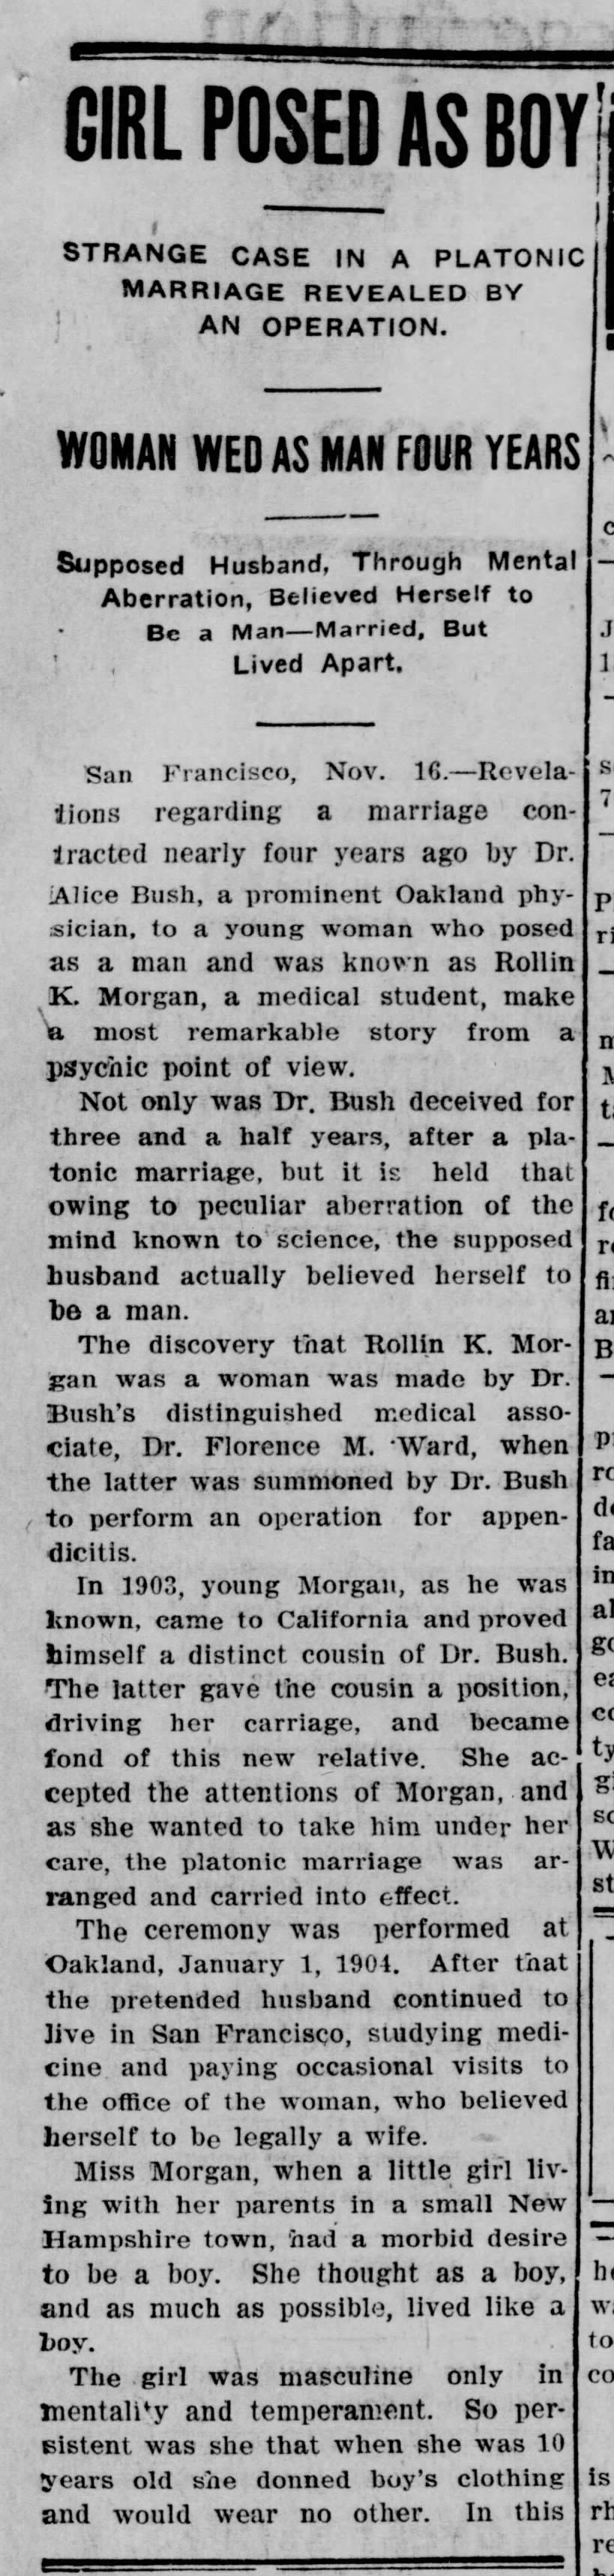 Dr. Alice Bush_marriage to transsexual_1909